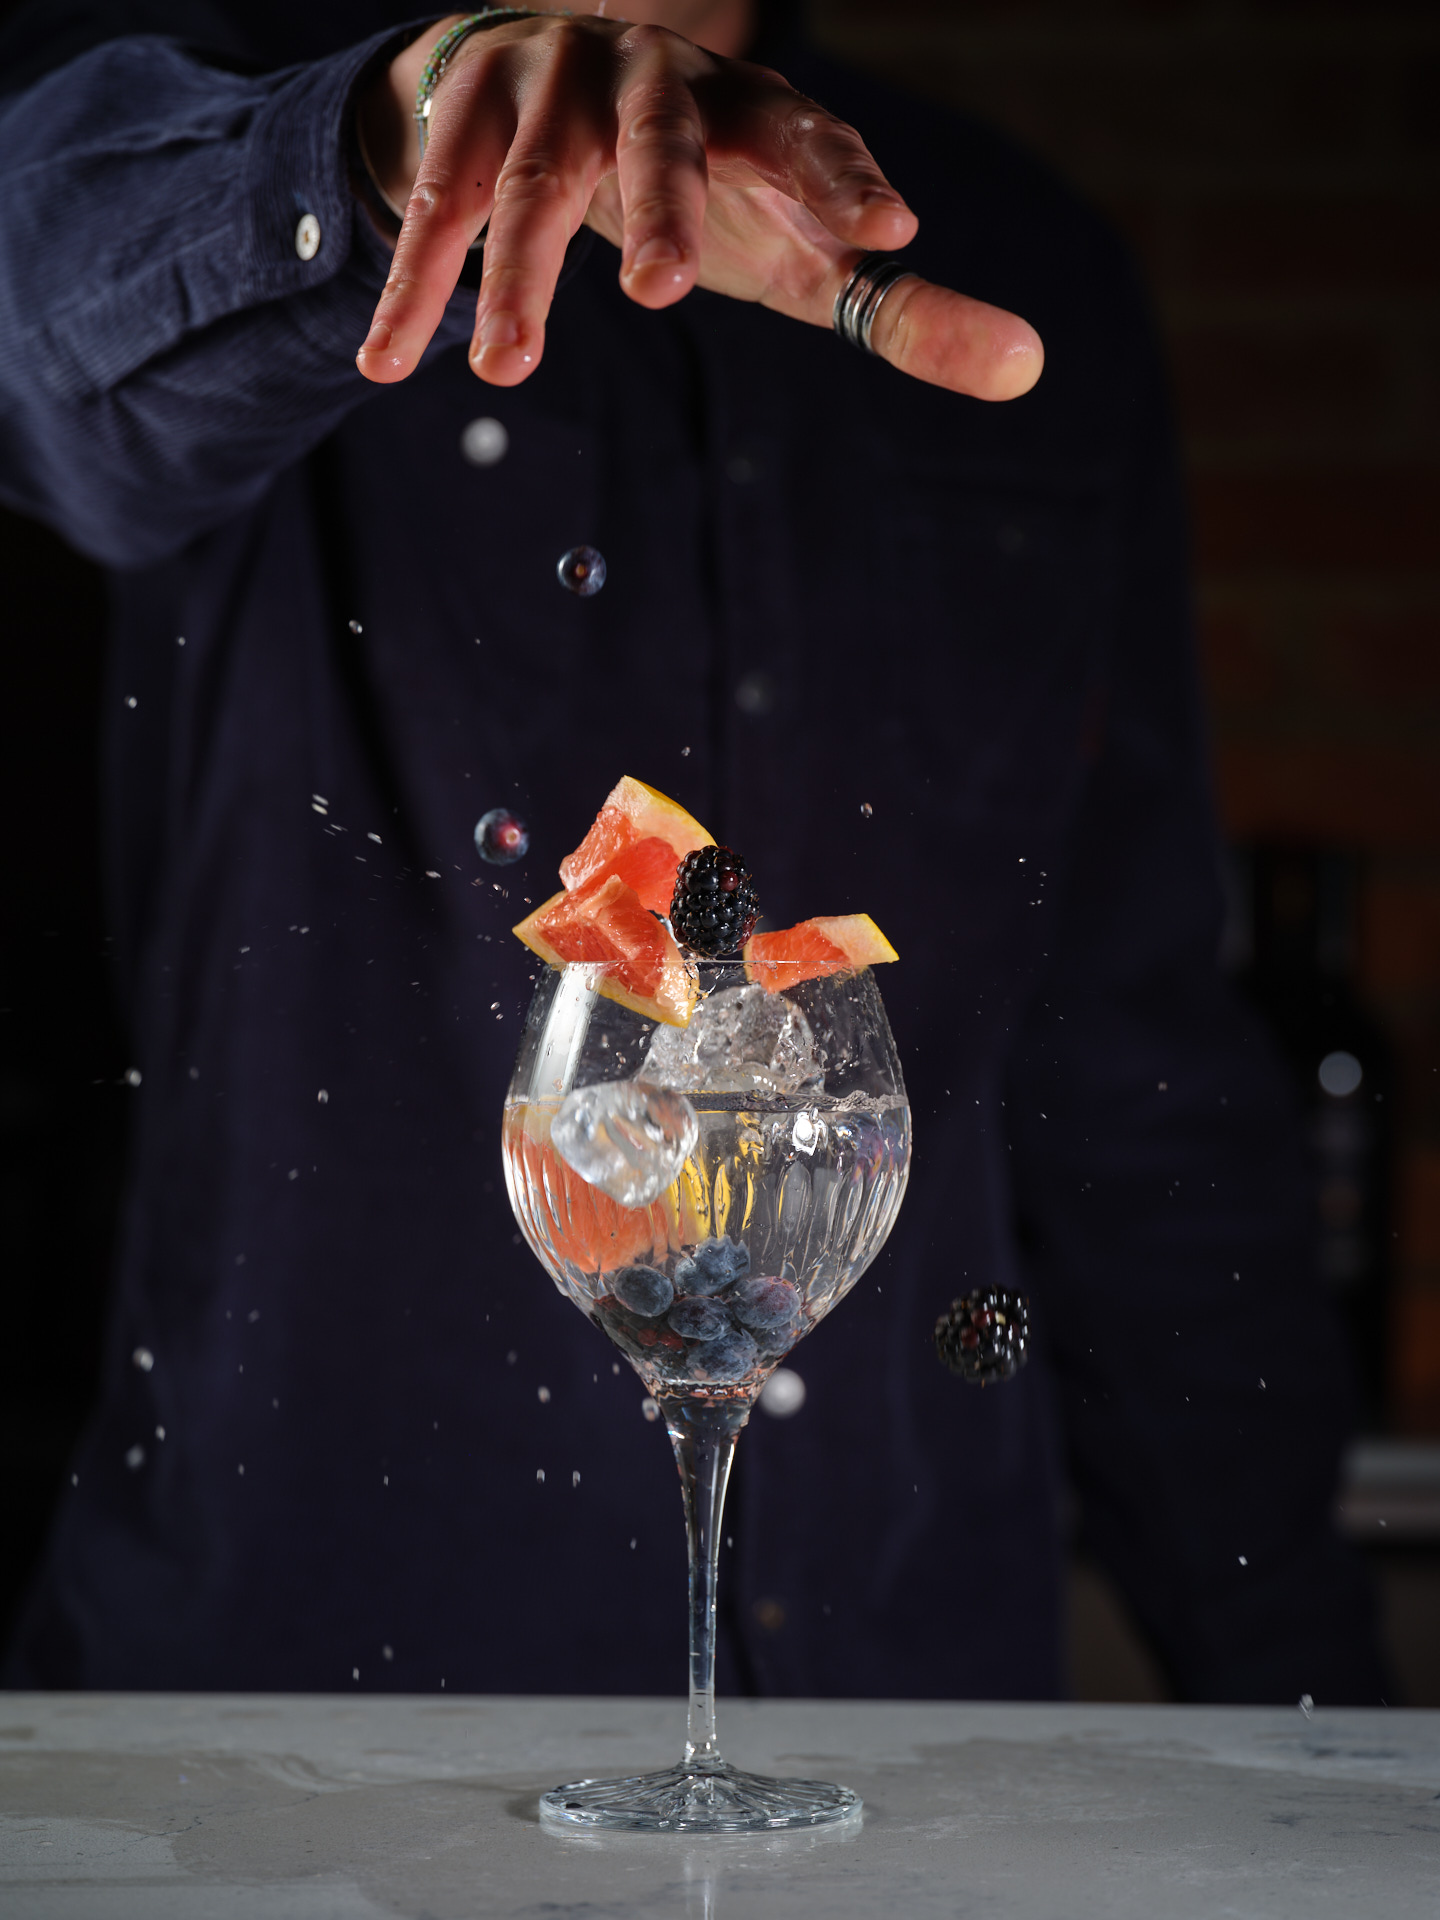 Casual Dining | An image of someone making a delicious Stanwell cocktail